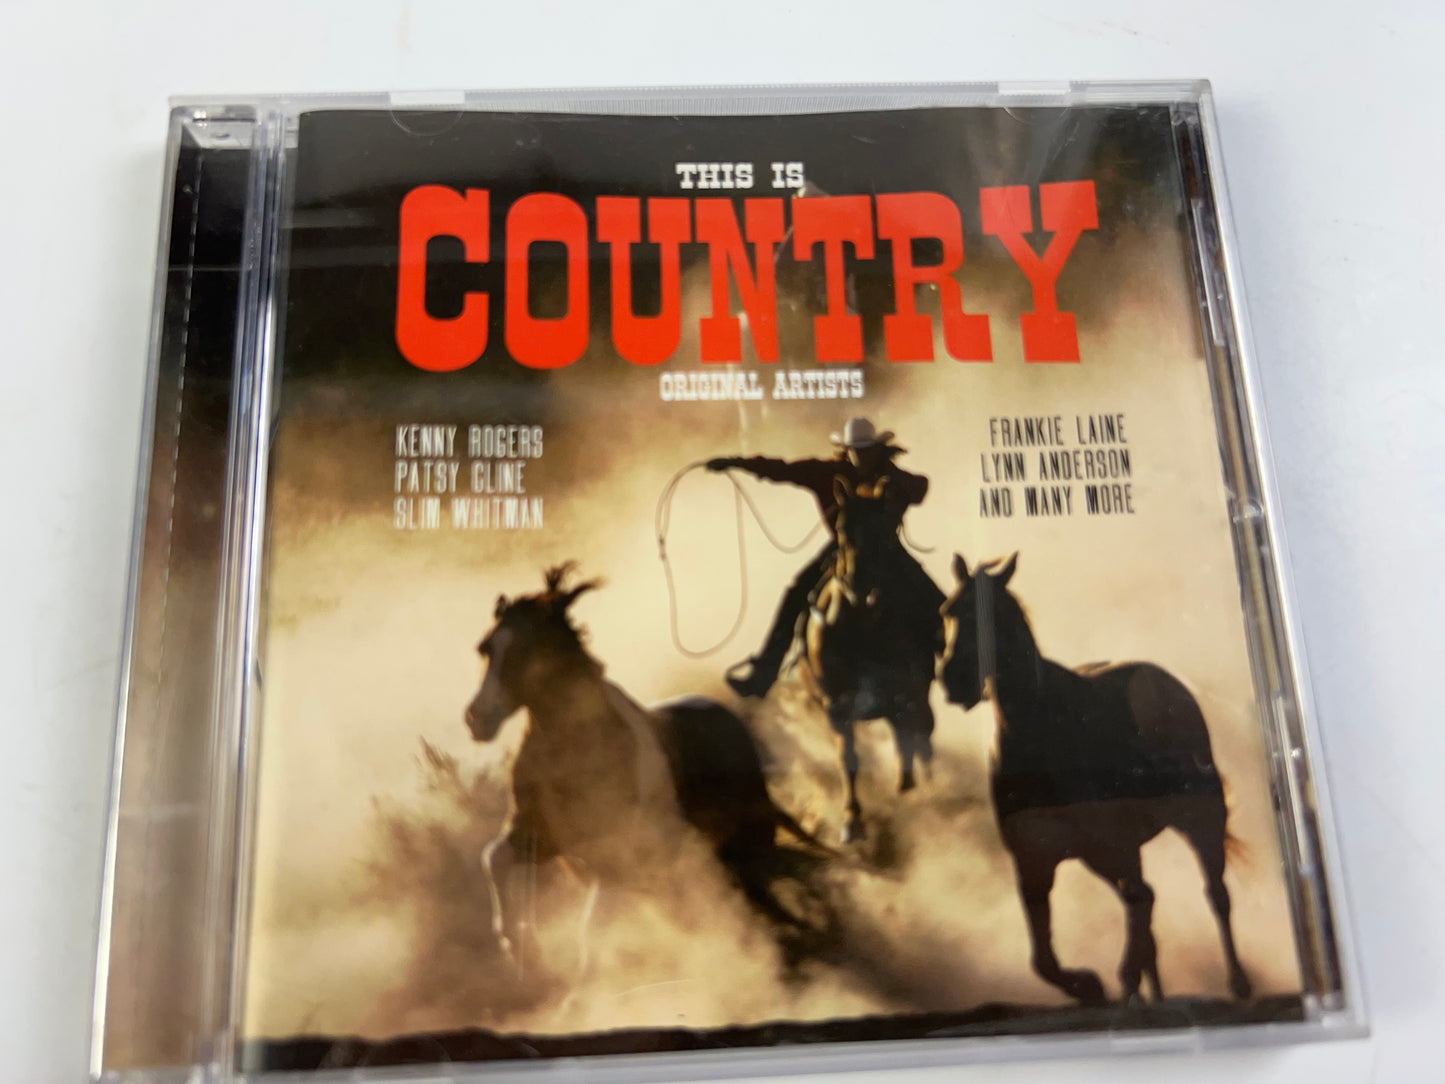 This Is Country [Original Artists] CD Kenny Rogers Patsy Kline Etc